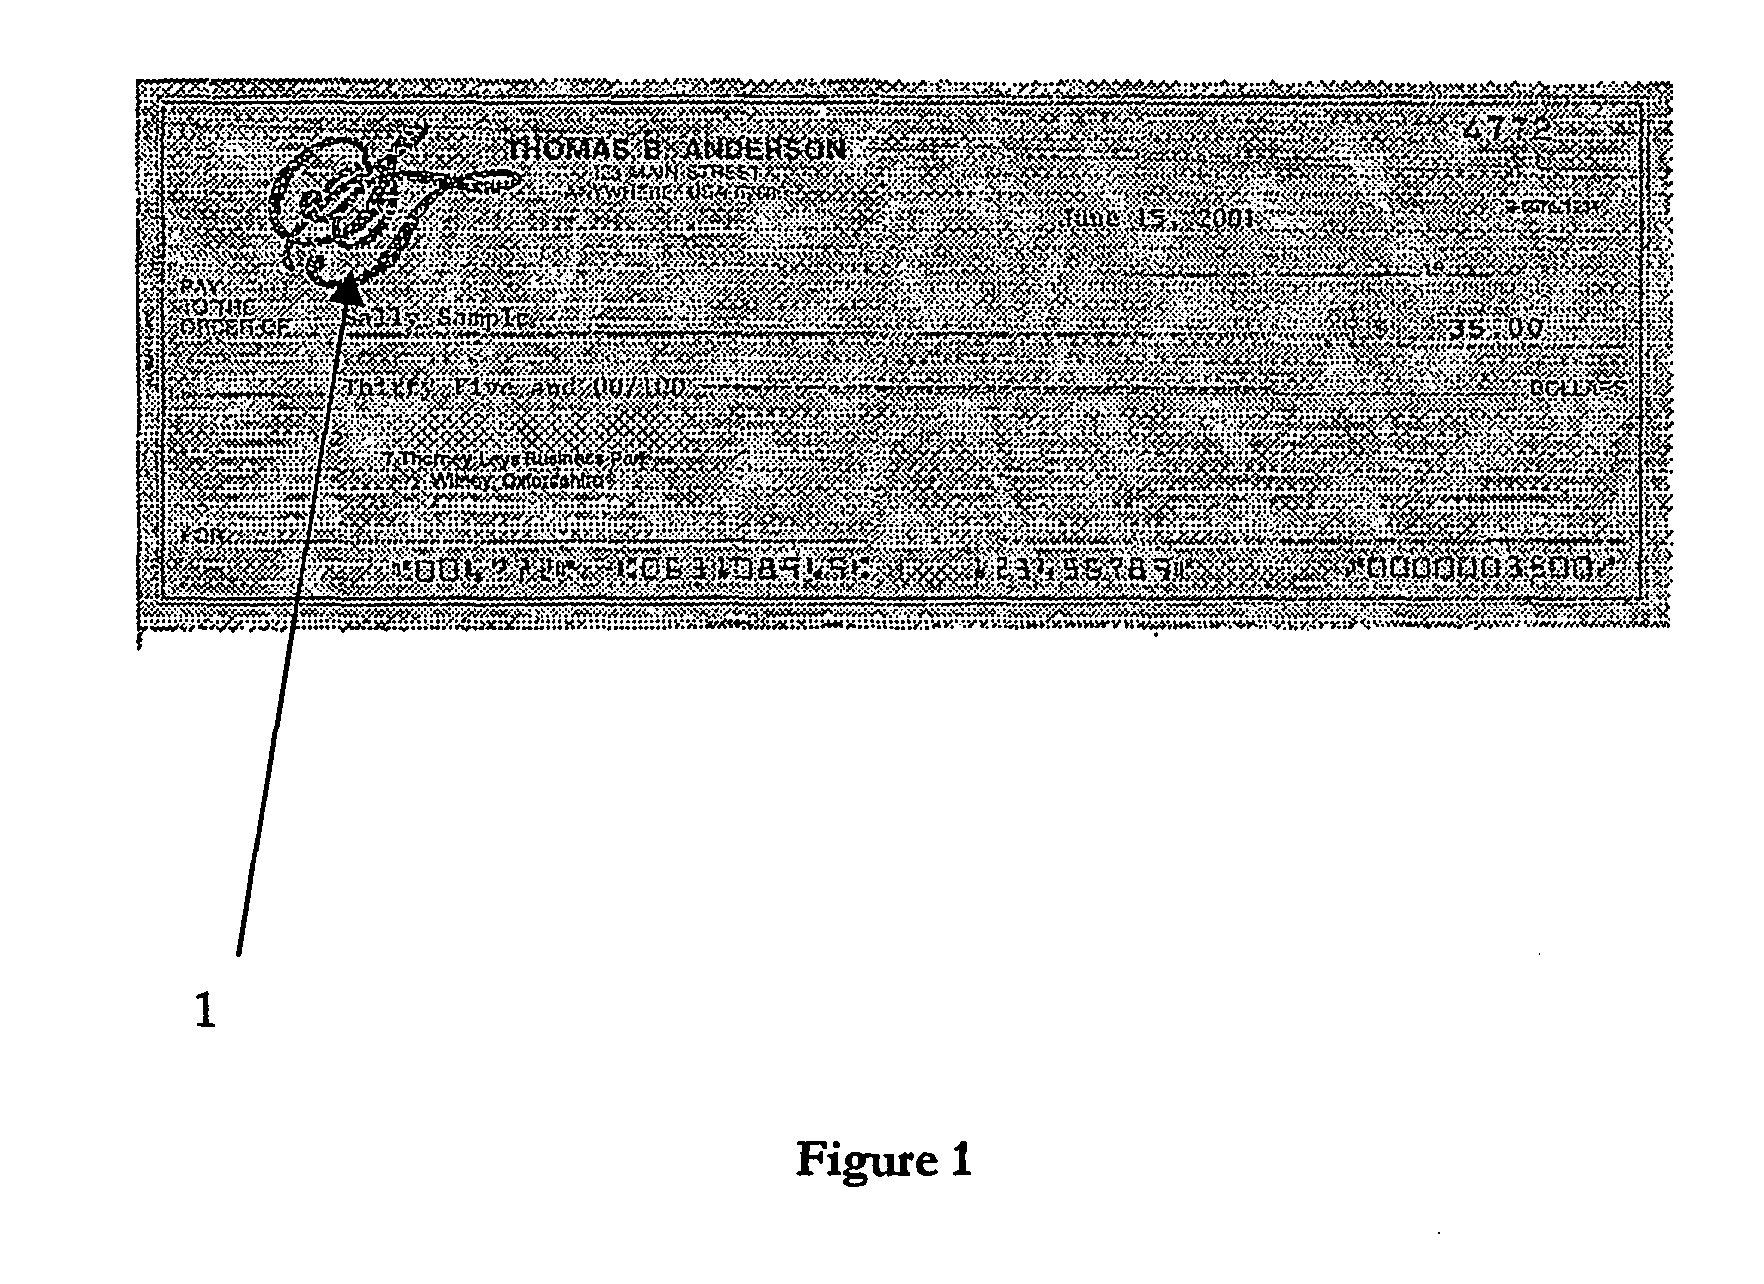 Document printed with graphical symbols which encode information